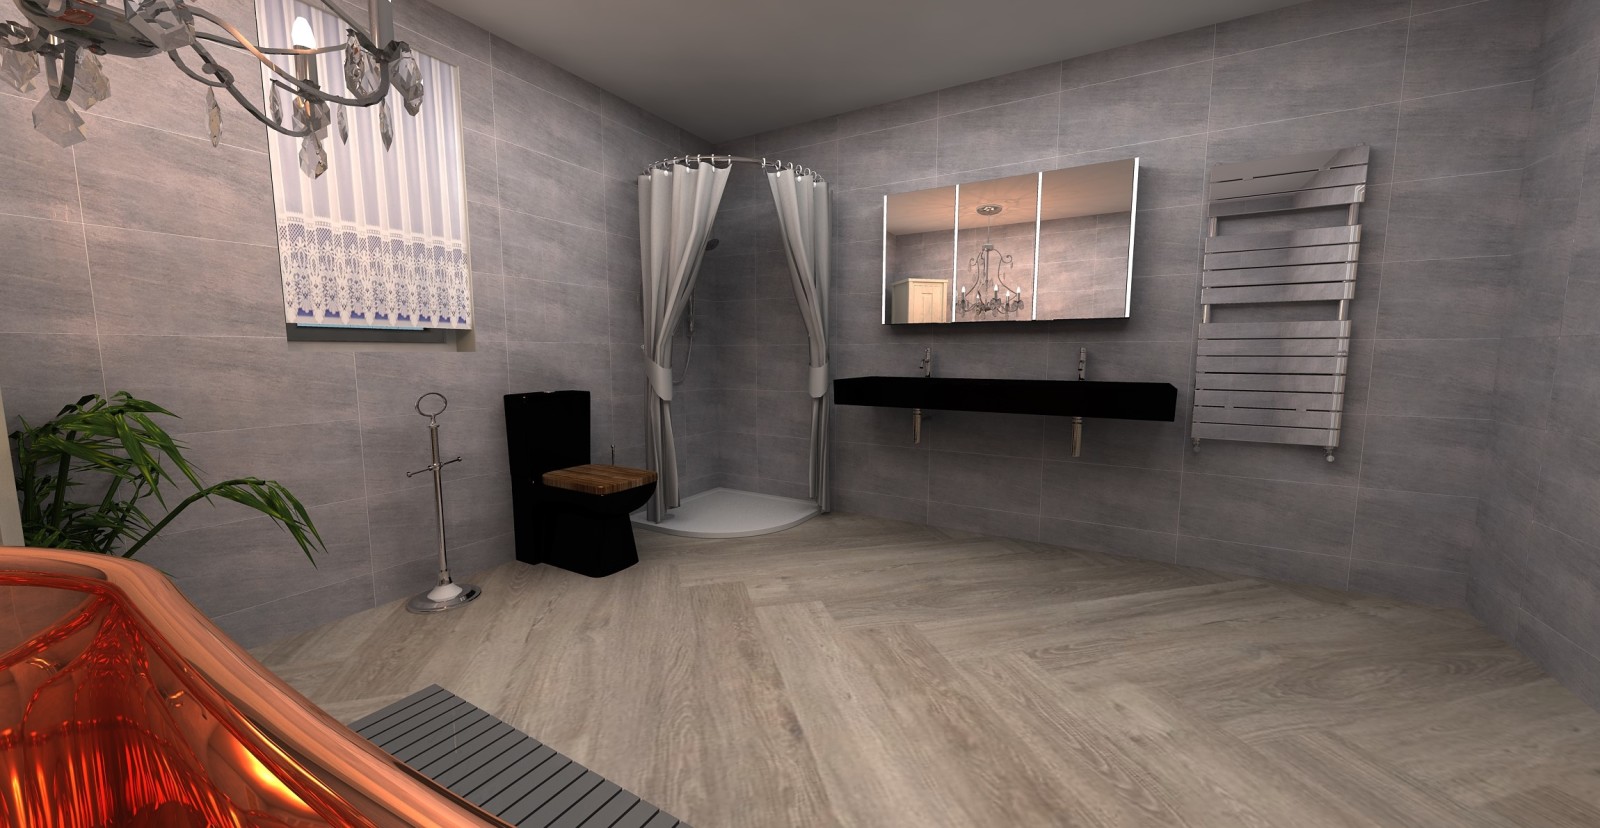 Digital lifestyle image of a bathroom designed using the Sanctuary Bathrooms' 3D design tool, featuring everything written in the previous caption, but further away